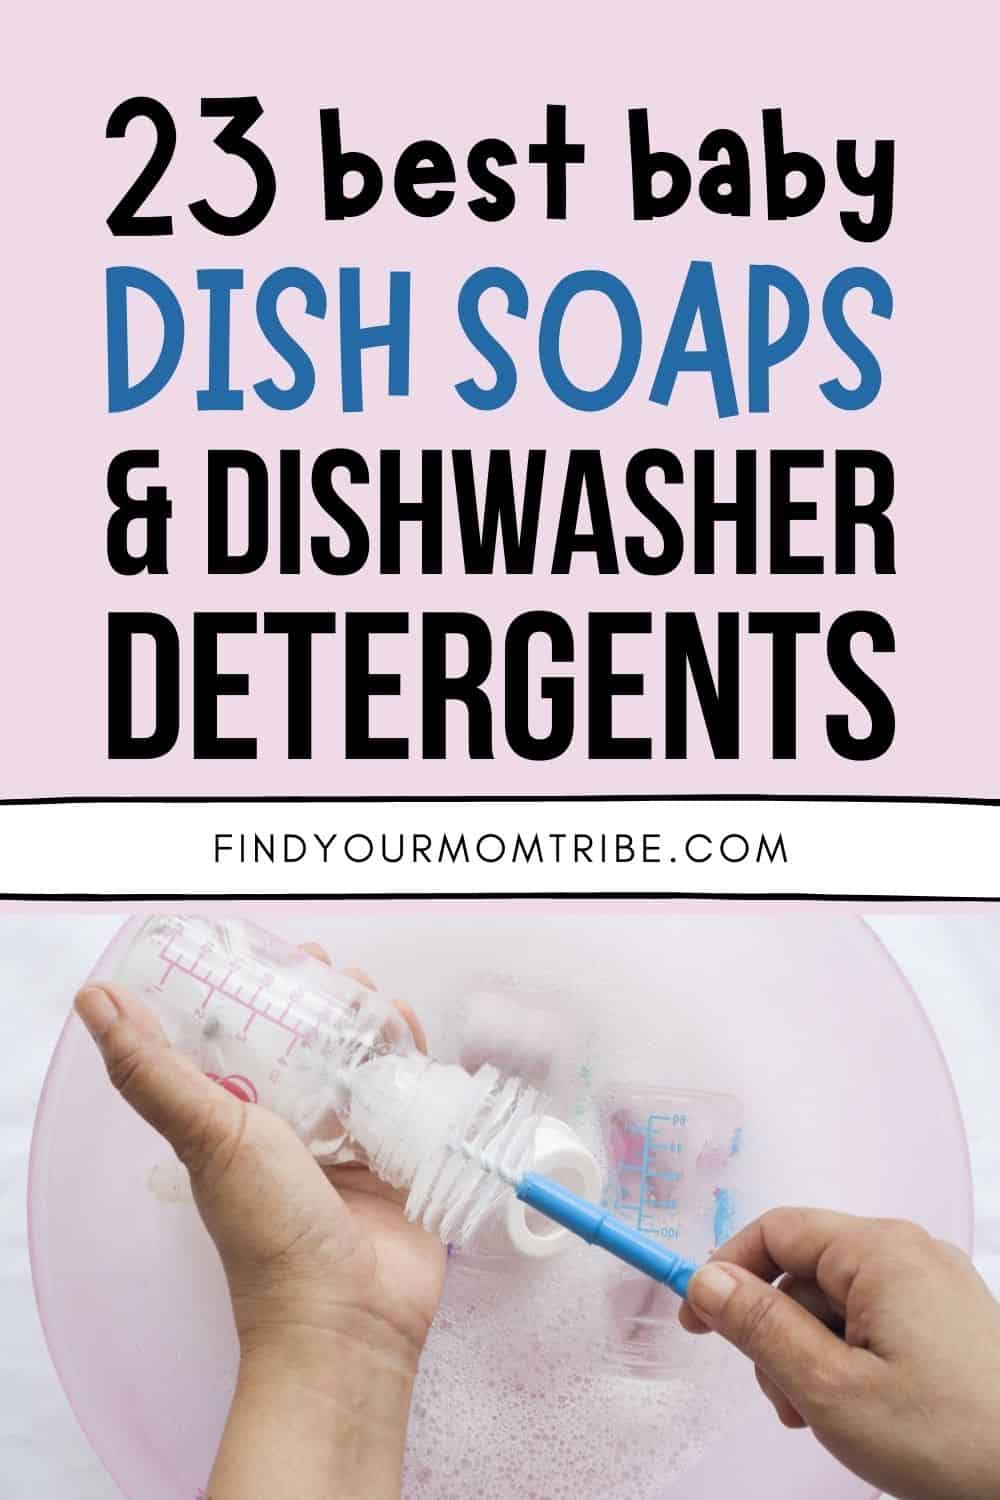 23 Best Baby Dish Soaps And Dishwasher Detergents Pinterest